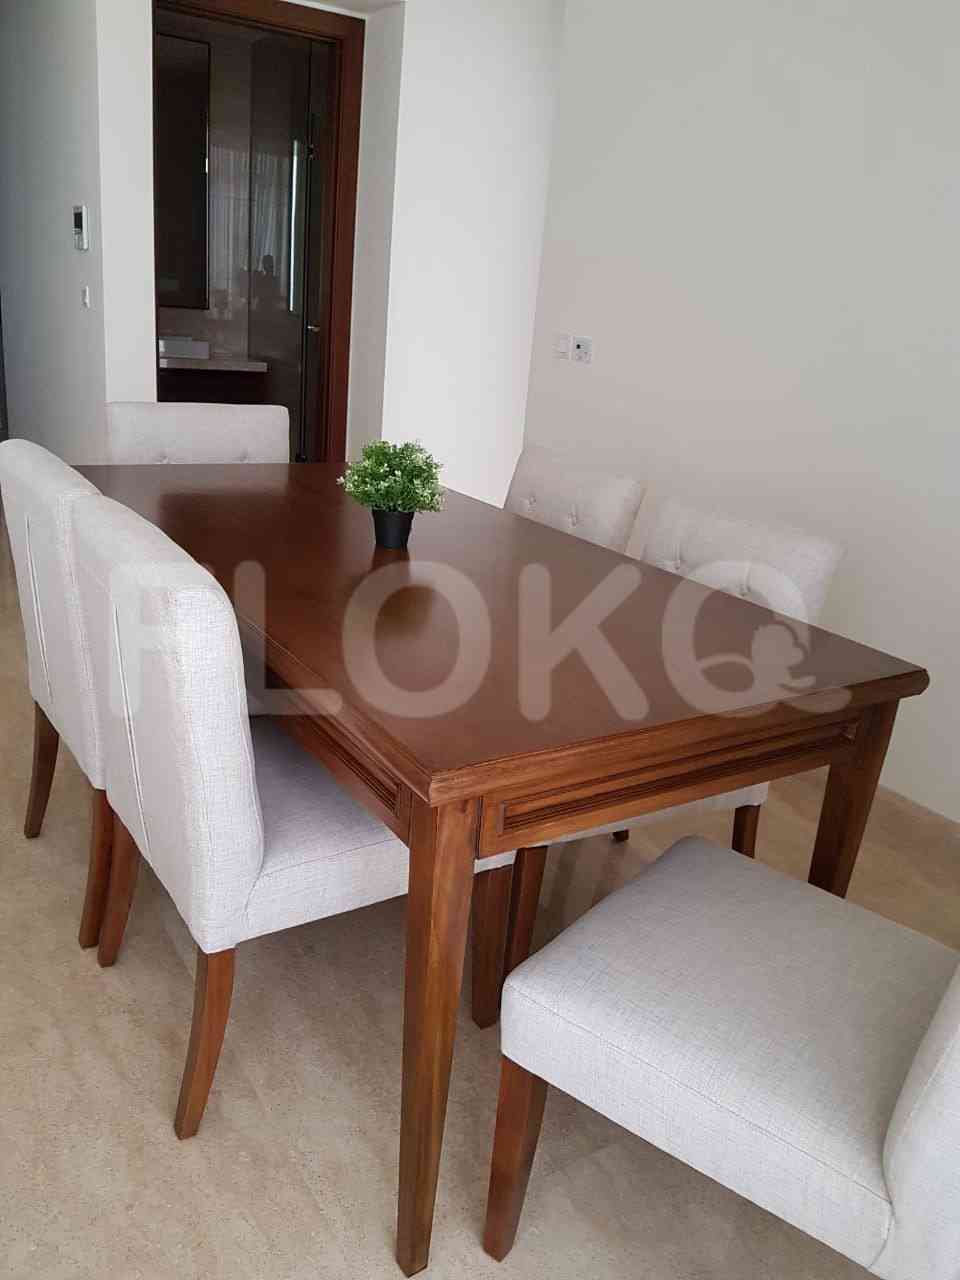 2 Bedroom on 18th Floor for Rent in Pakubuwono Spring Apartment - fga4a1 4